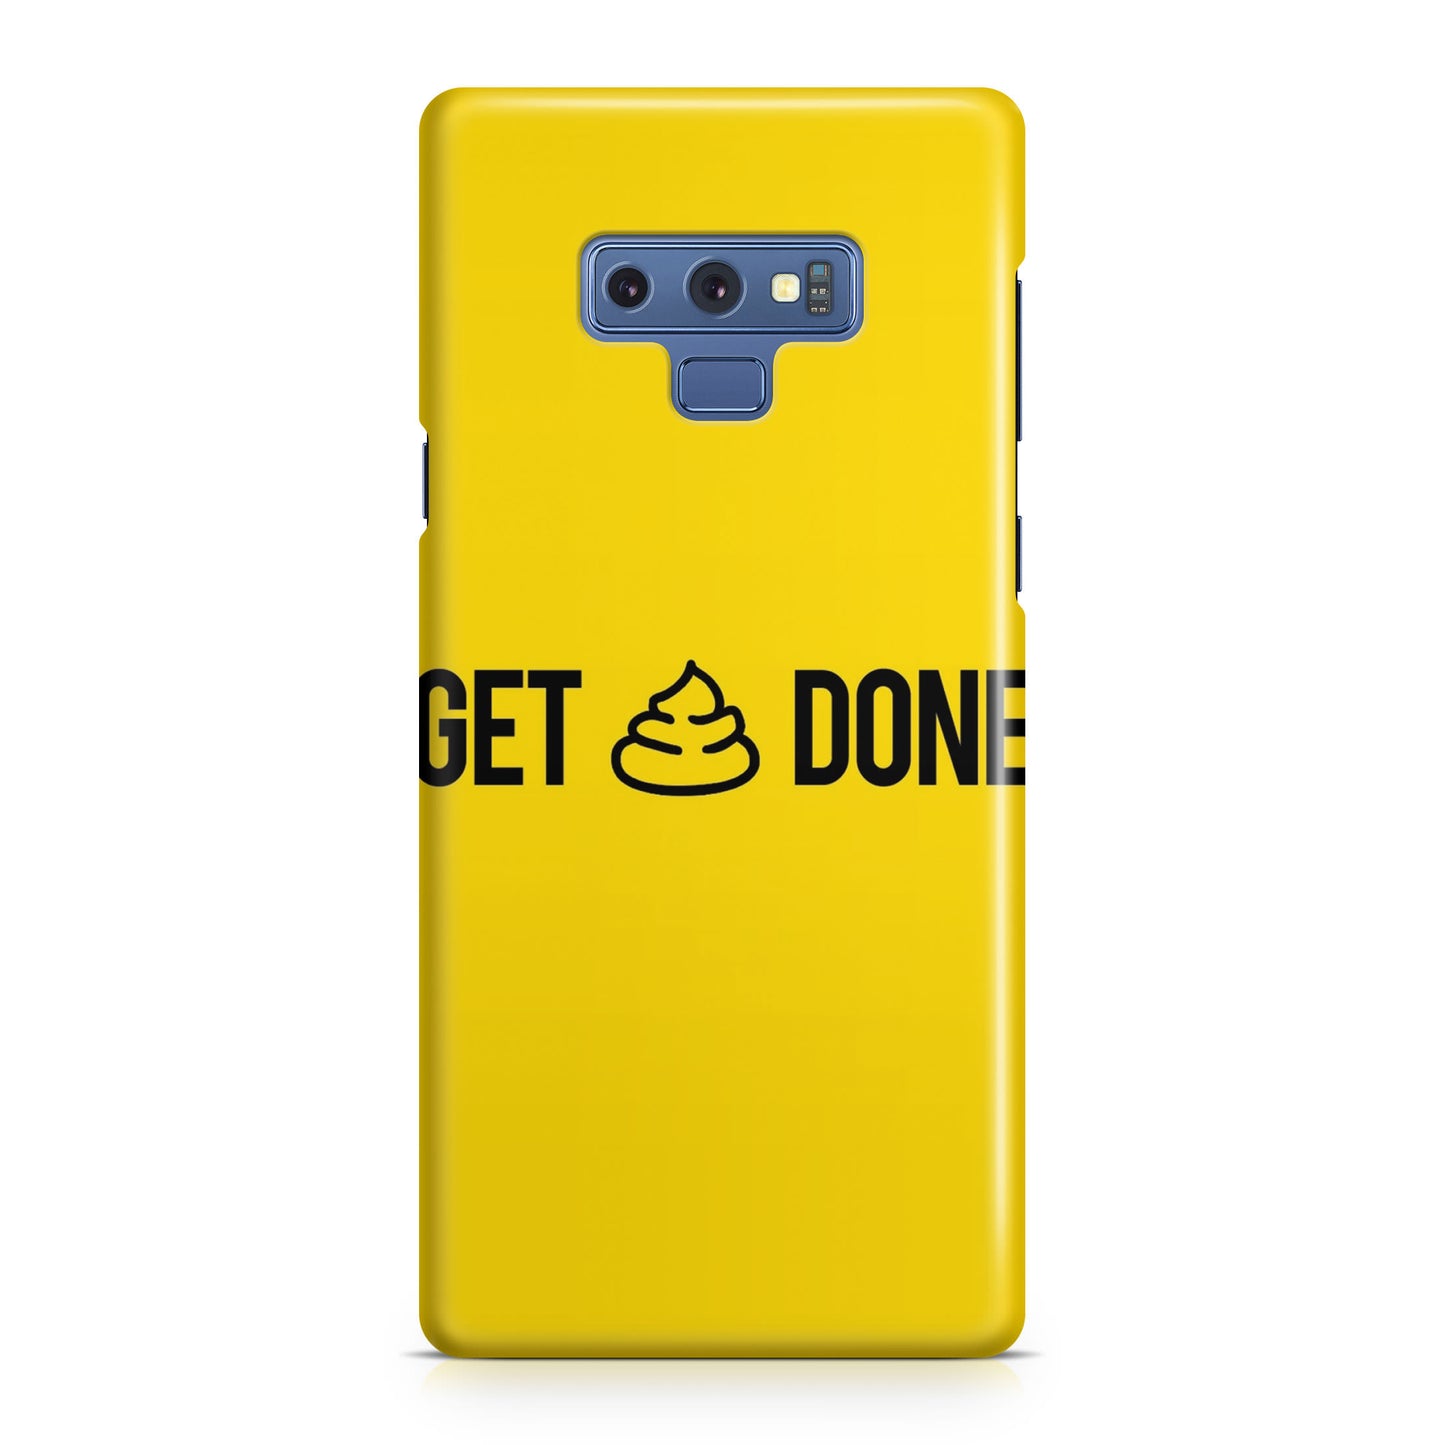 Get Shit Done Galaxy Note 9 Case